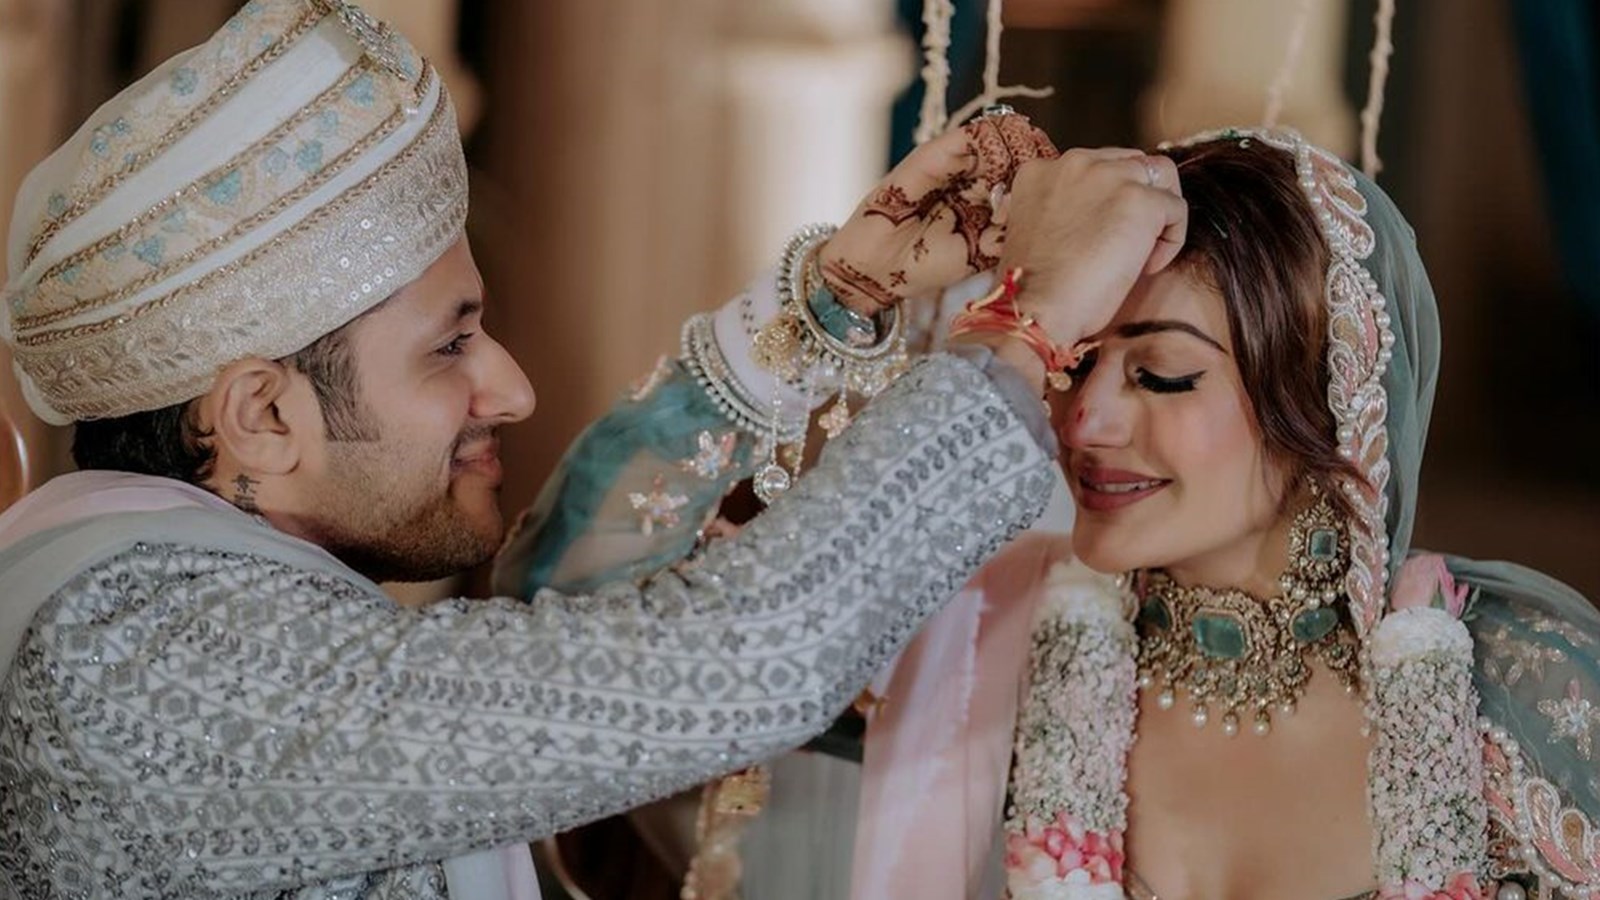 Ishqbaaz fame Surbhi Chandna's latest bridal photo shoot will make you plan  your own wedding - Bollywood News & Gossip, Movie Reviews, Trailers &  Videos at Bollywoodlife.com